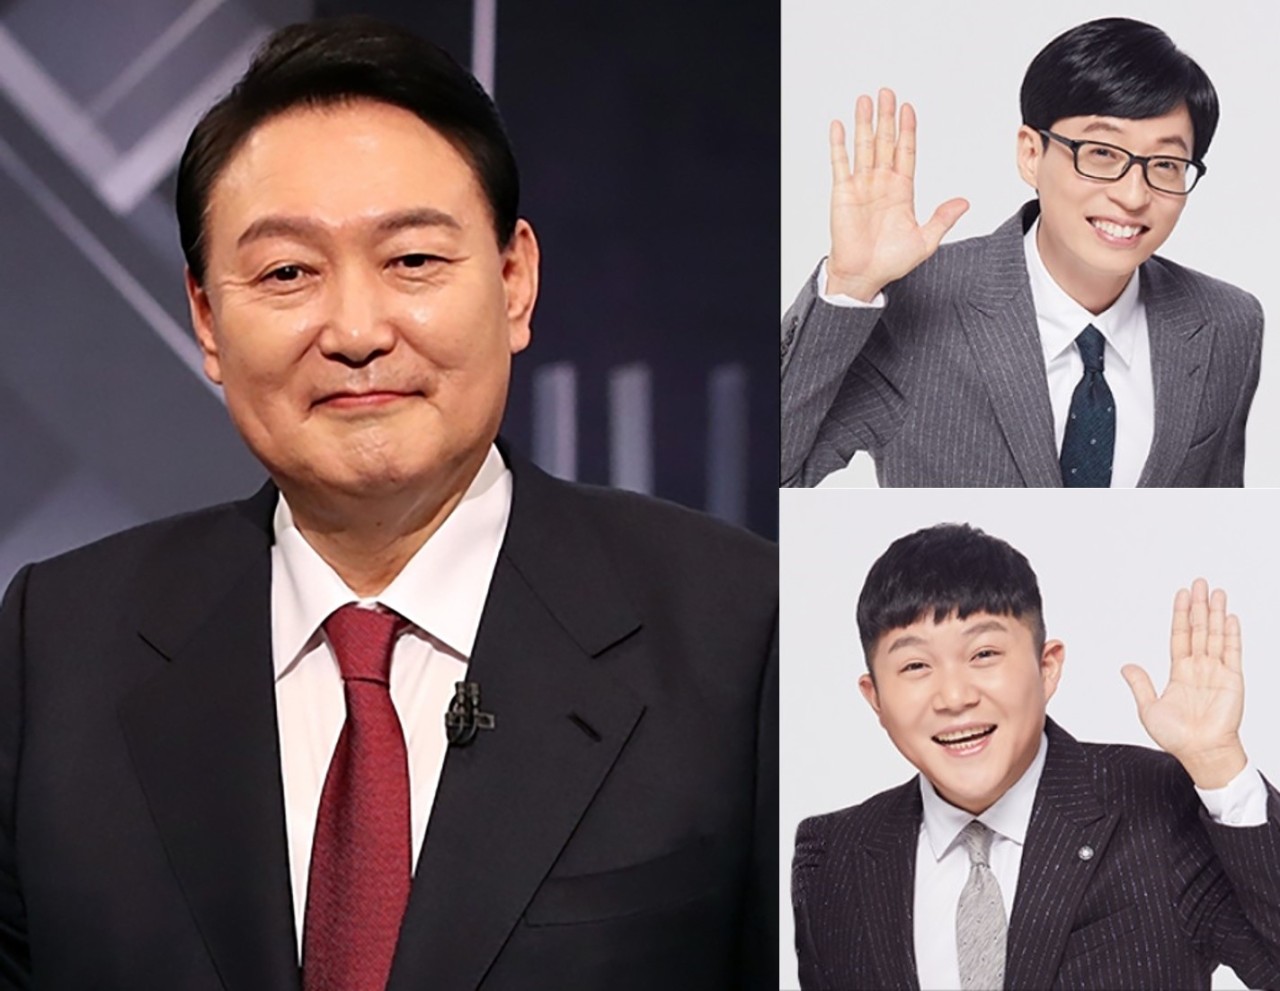 Clockwise from left: President-elect Yoon Suk-yeol, comedians Yoo Jae-suk and Jo Se-ho from tvN’s “You Quiz on the Block” (EPA-Yonhap, tvN)